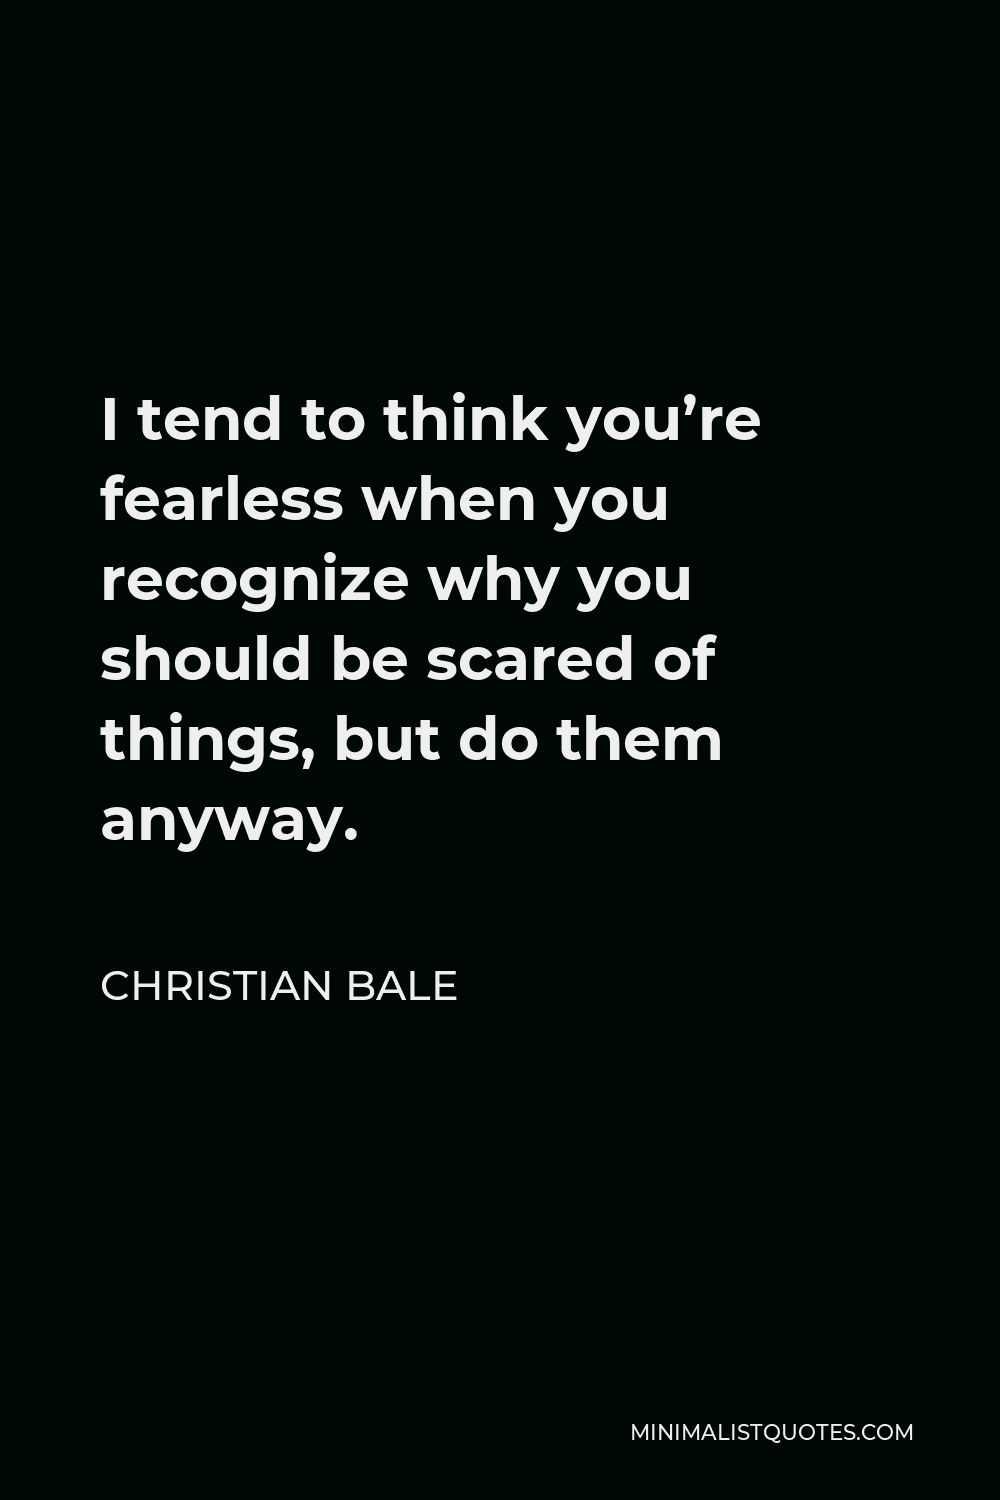 Christian Bale Quote - I tend to think you’re fearless when you recognize why you should be scared of things, but do them anyway.